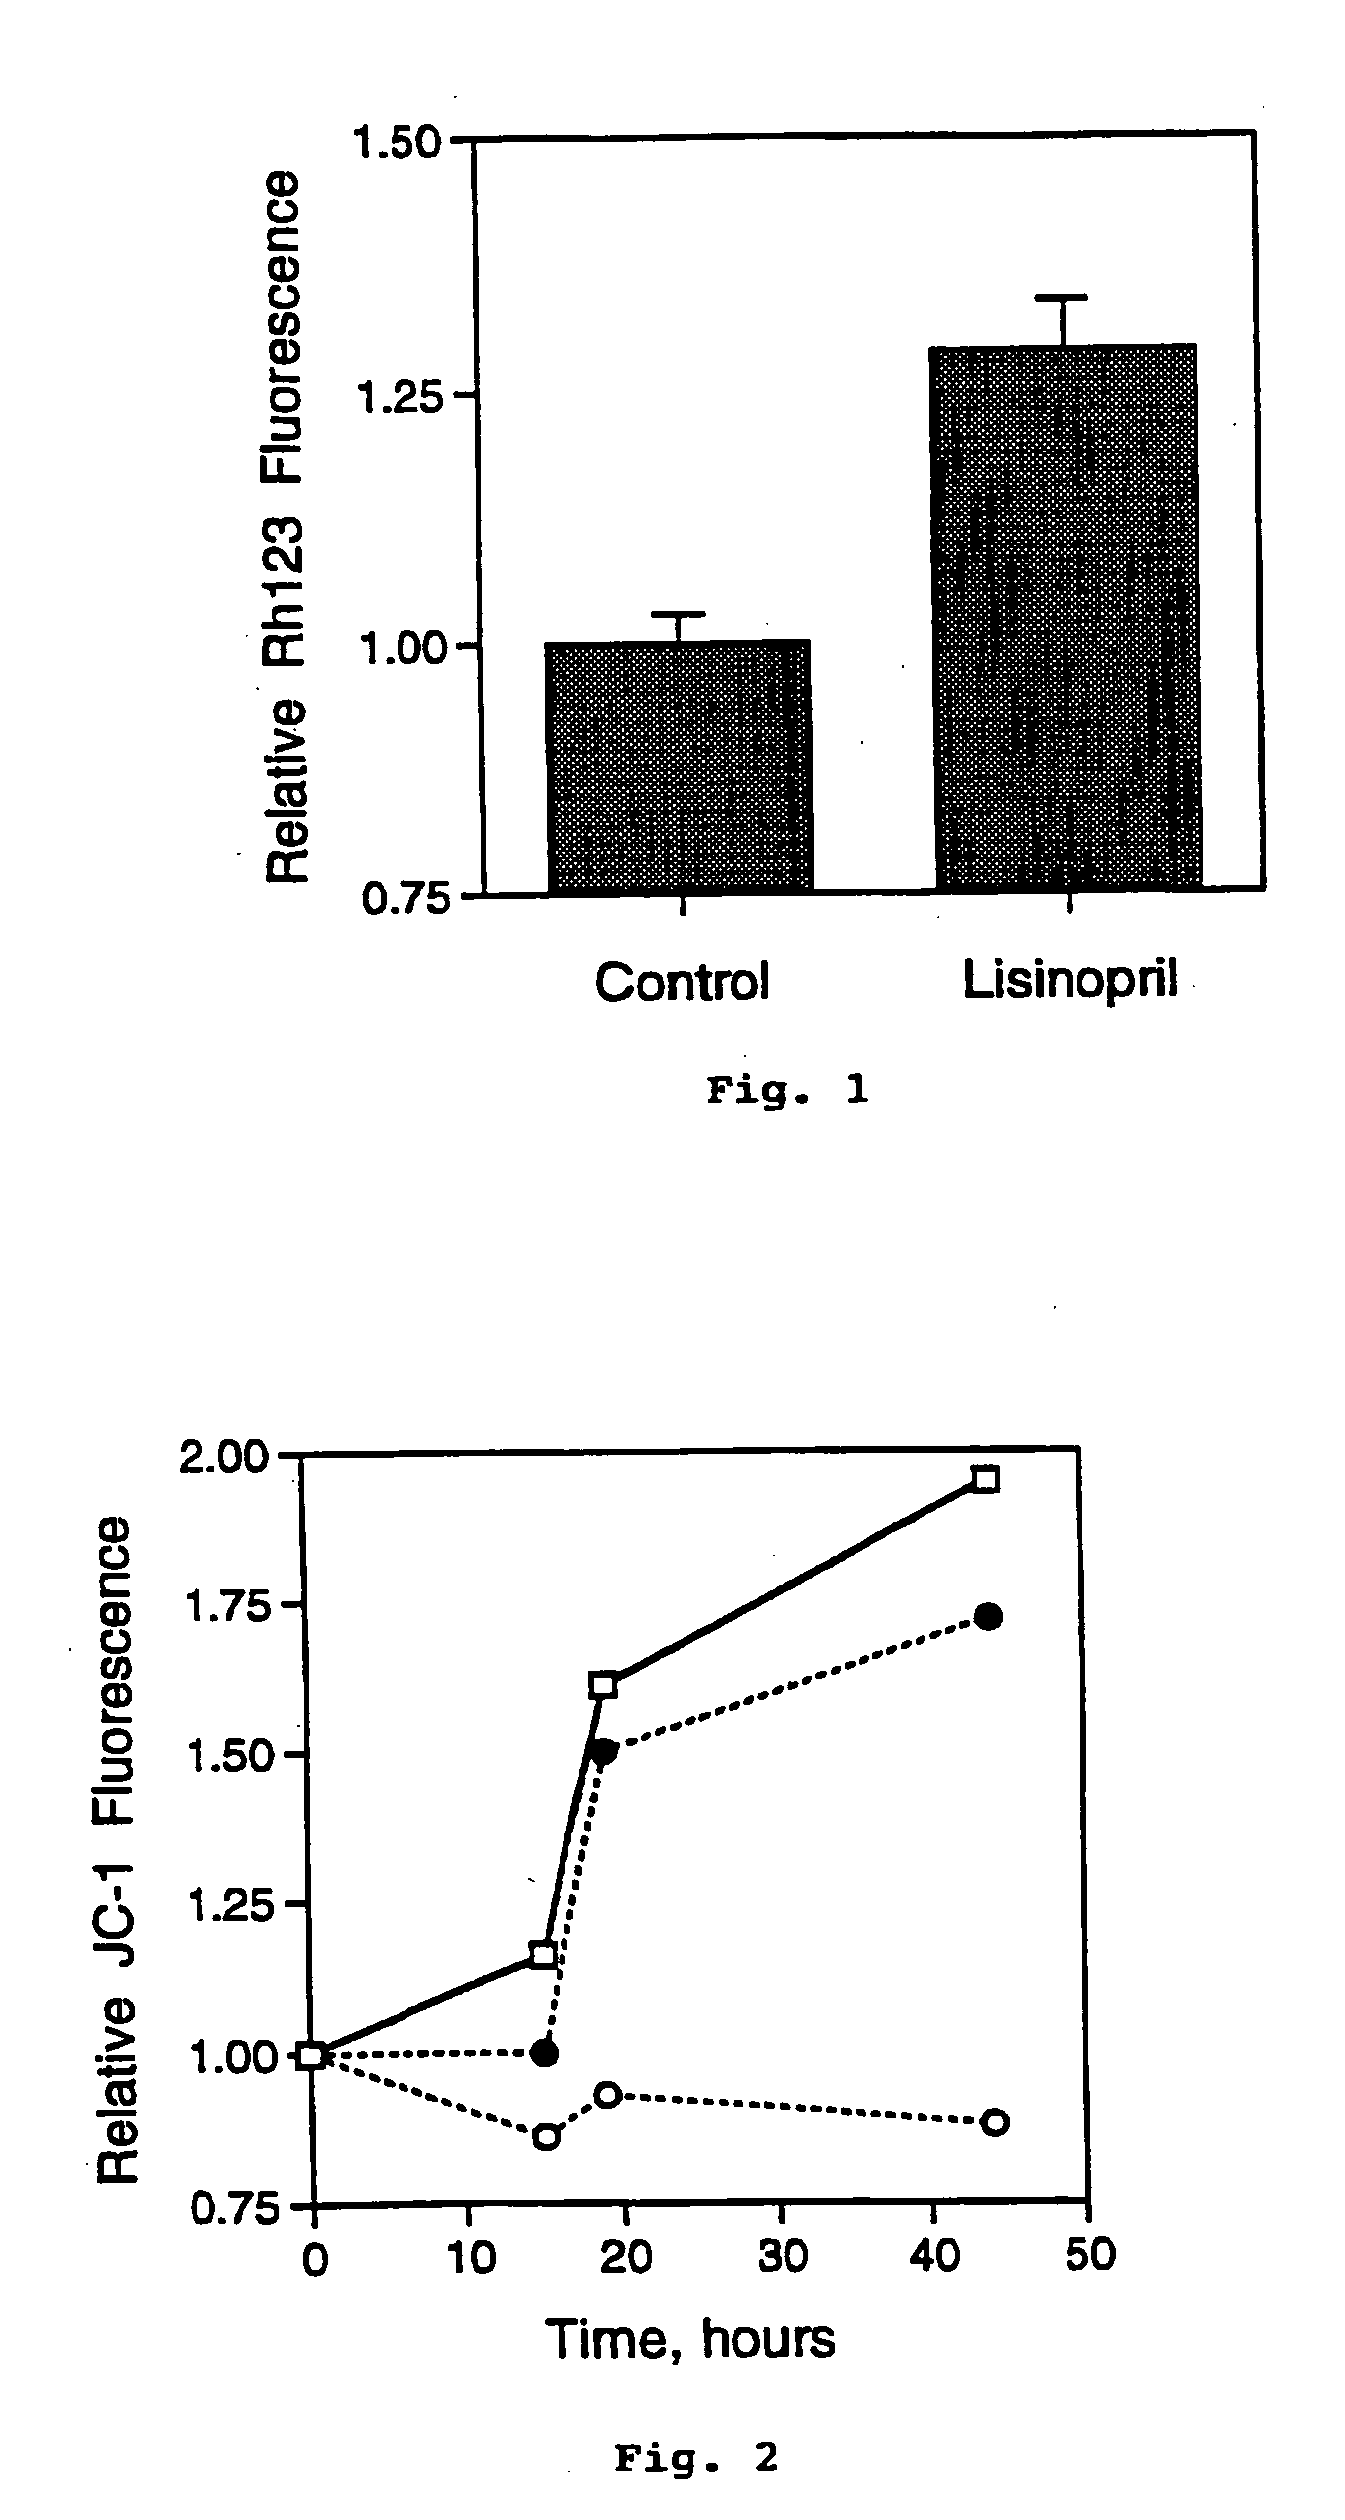 Use of inhibitors of the renin-angiotensin system